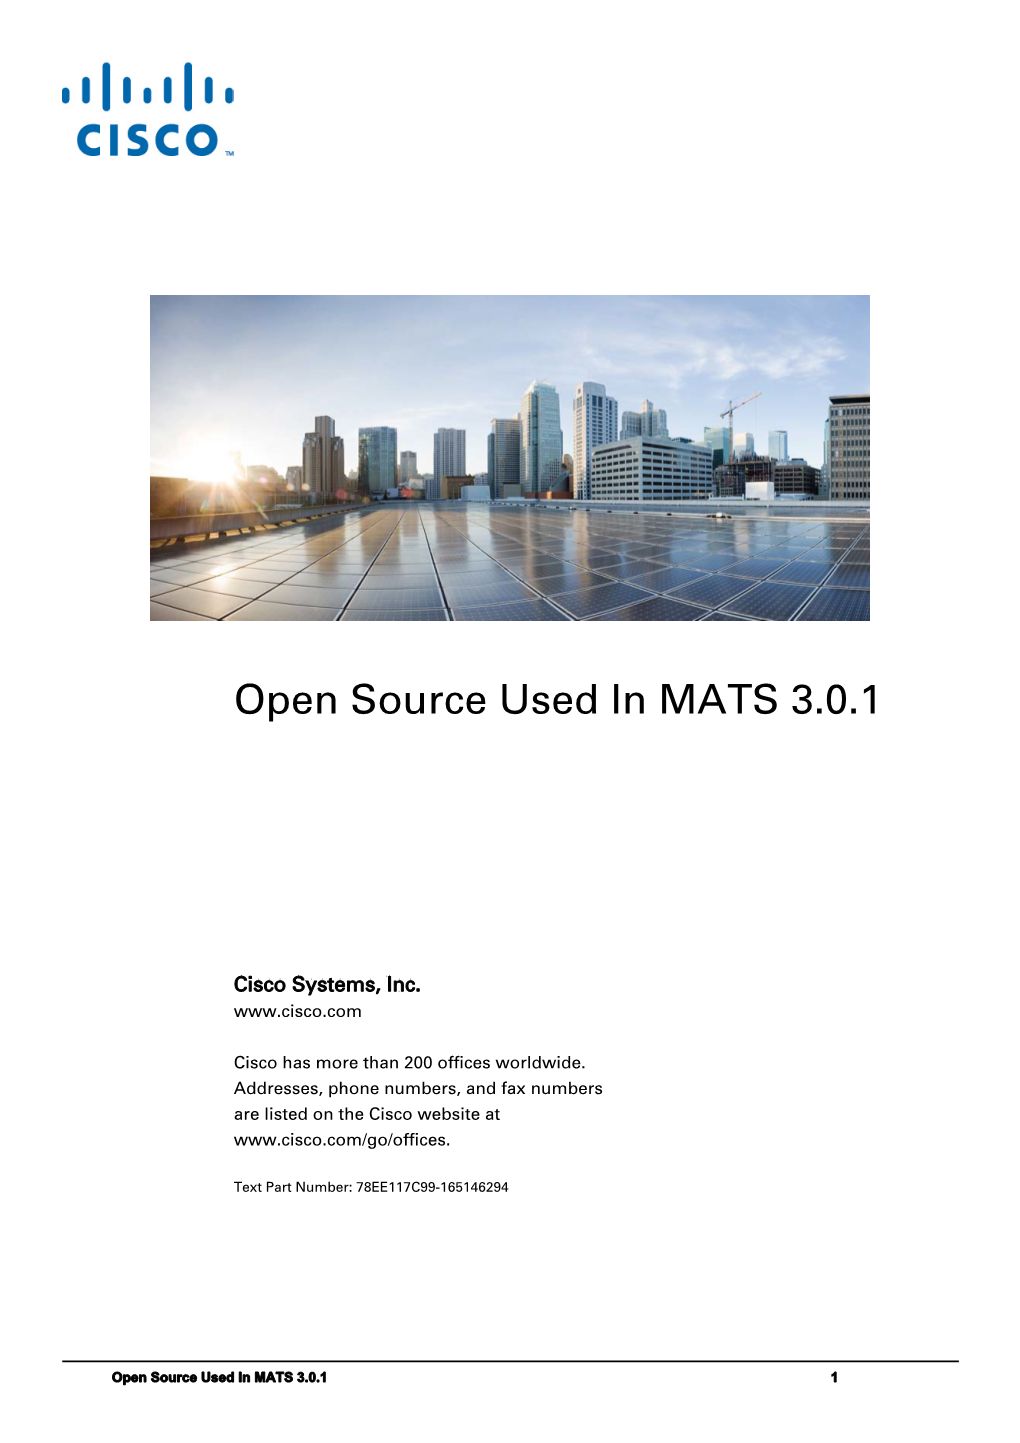 Open Source Used in MATS 3.0.1